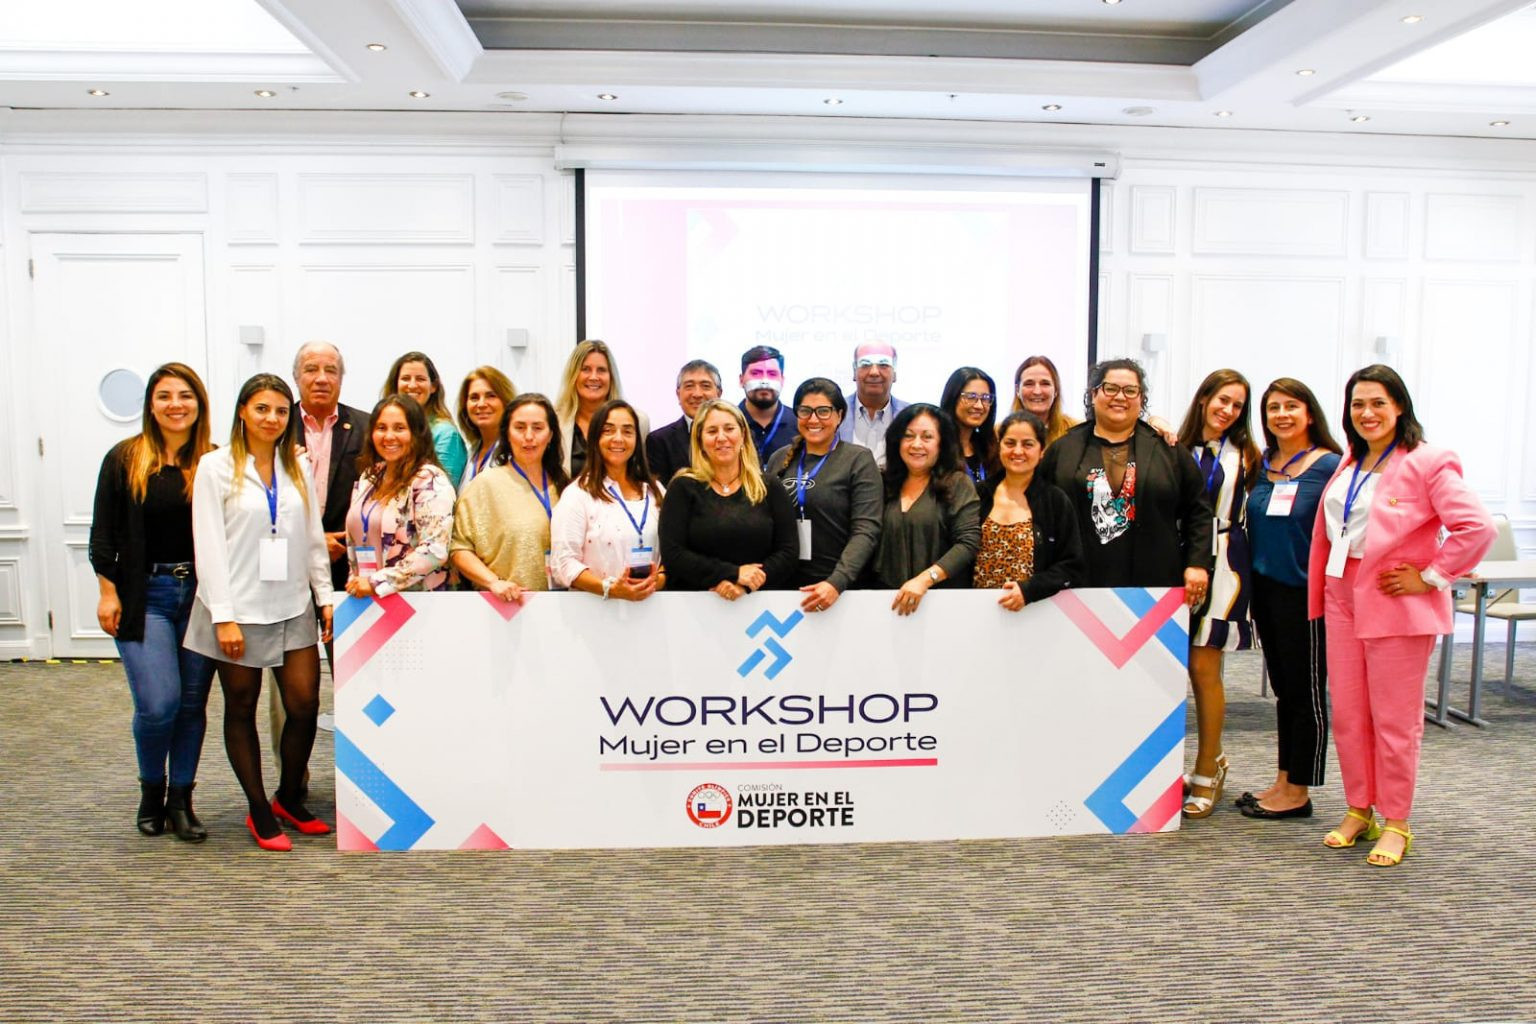 Two workshops for women in sport have been held in Chile this year ©COCH